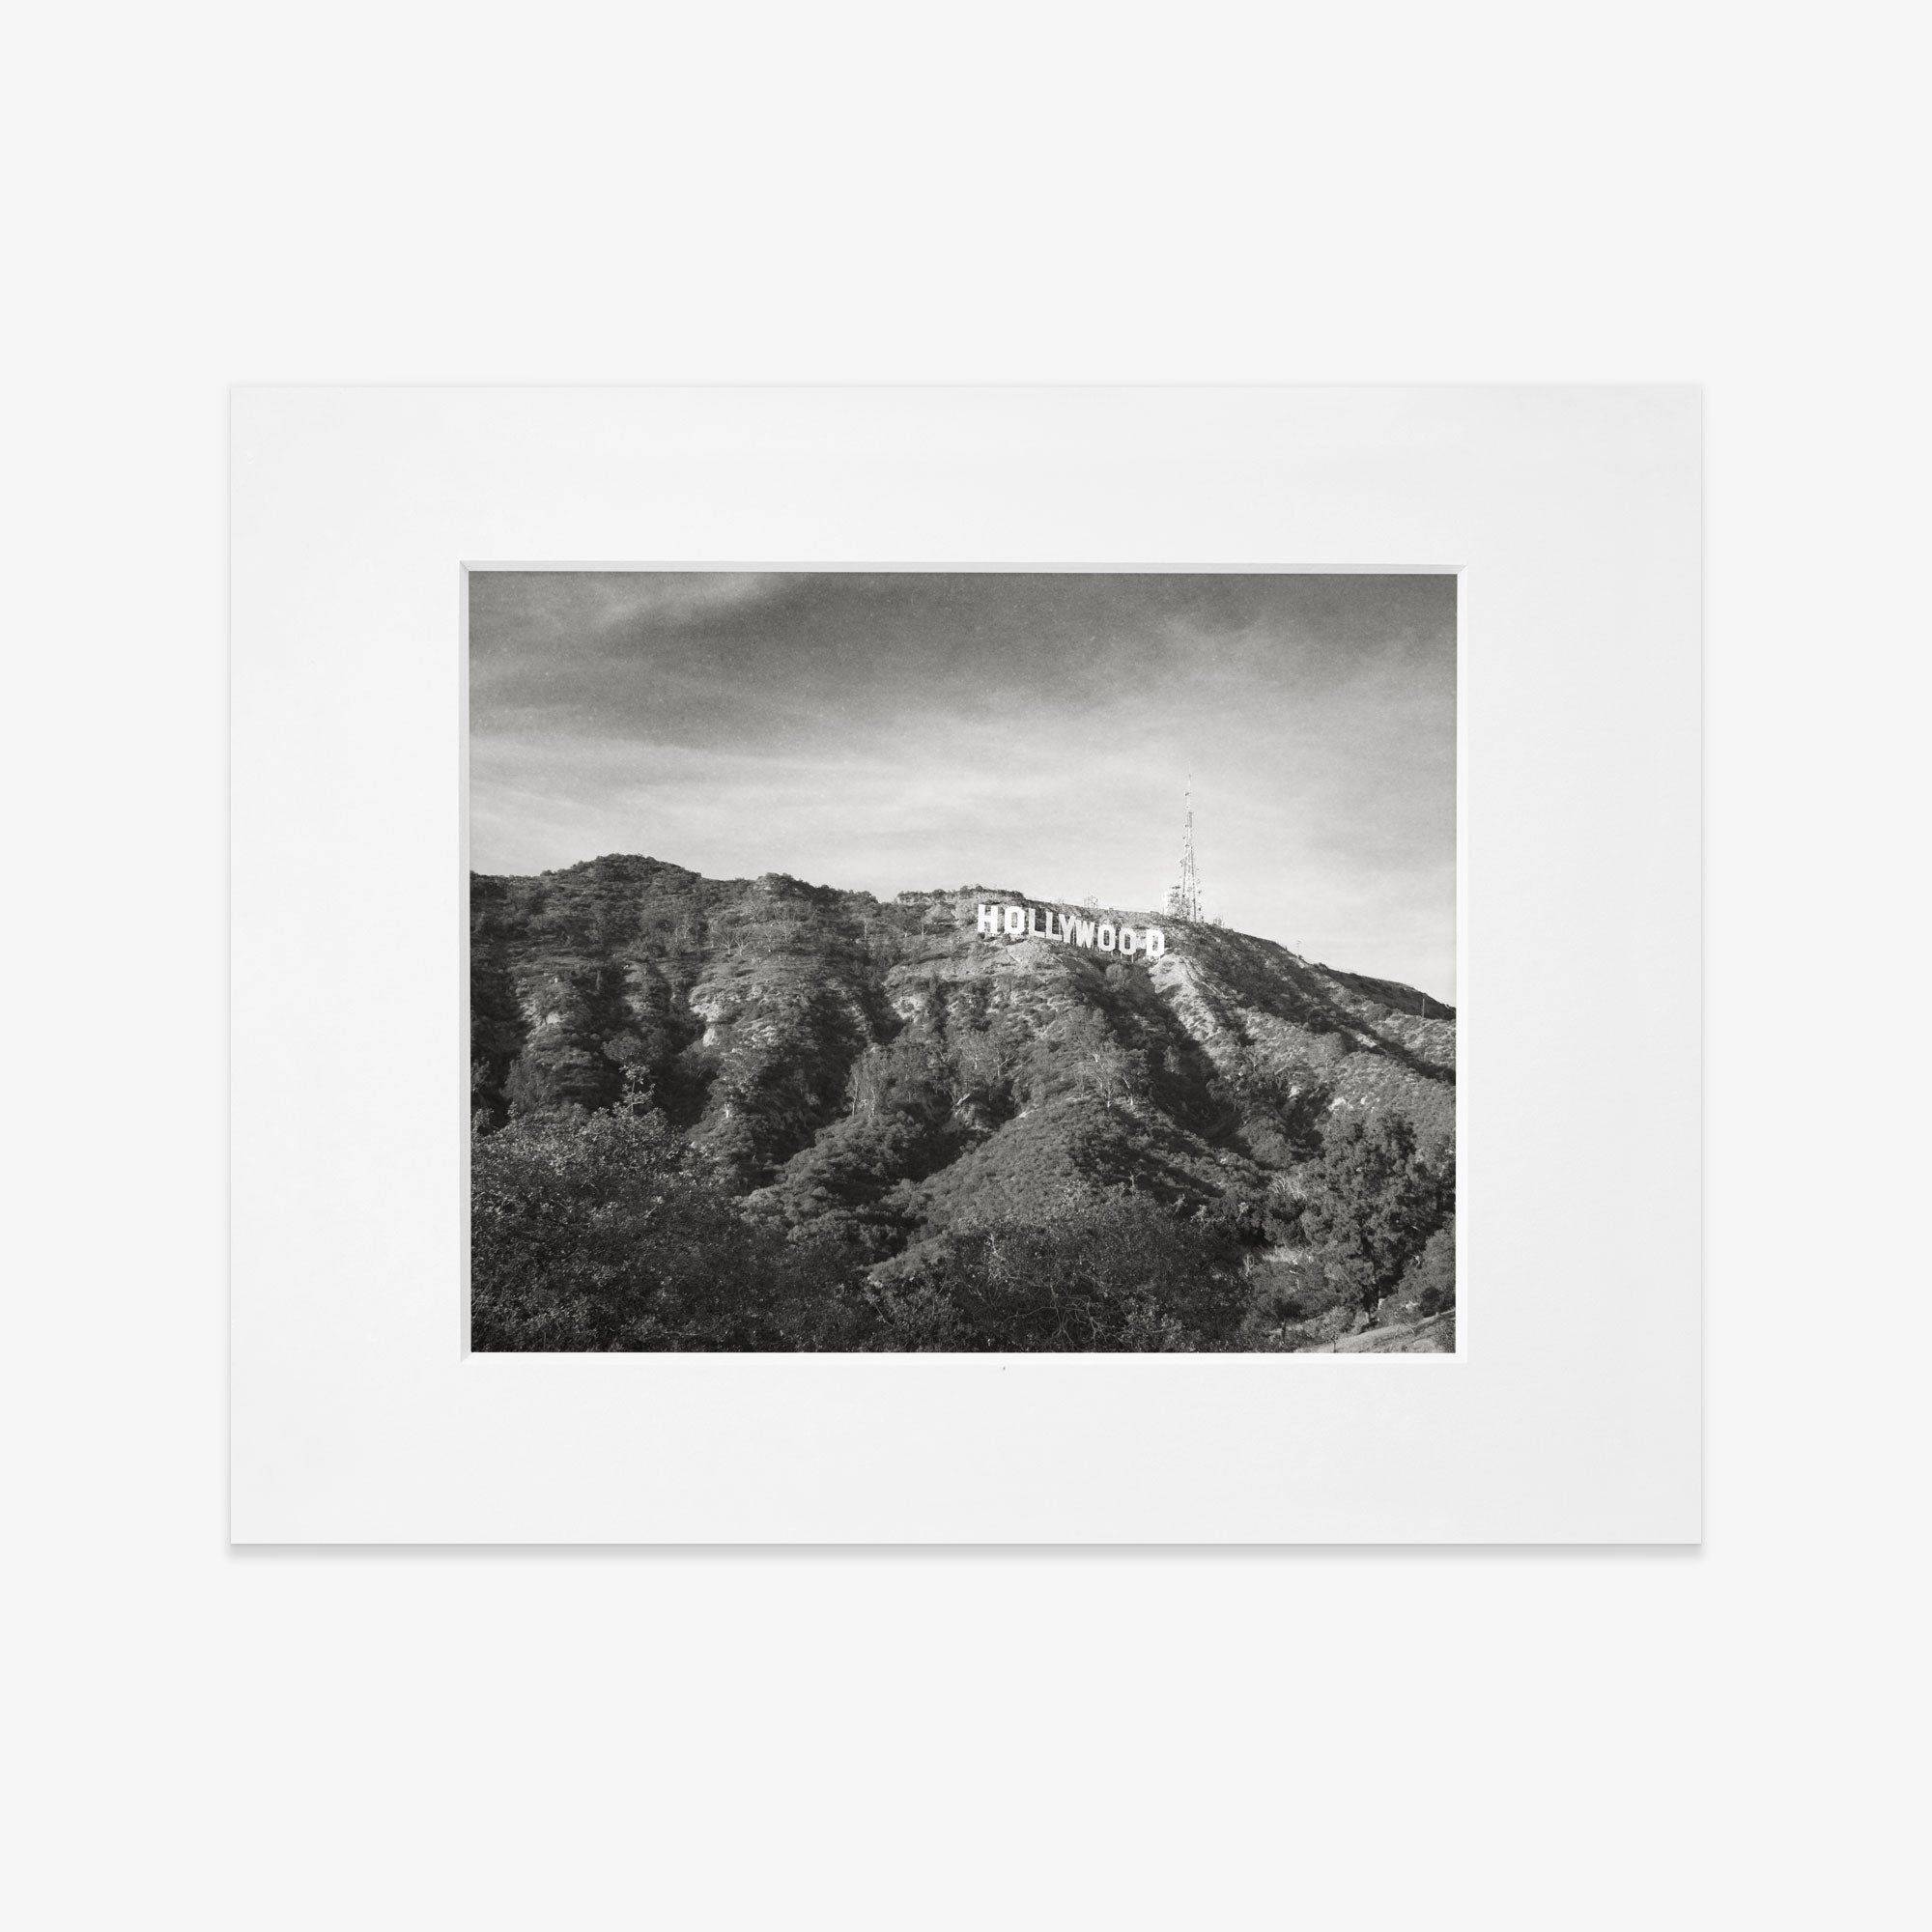 Black and white photograph of the Offley Green Hollywood Sign Black and White Vintage Print, &#39;Old Hollywood&#39; on archival photographic paper, framed within a white border.